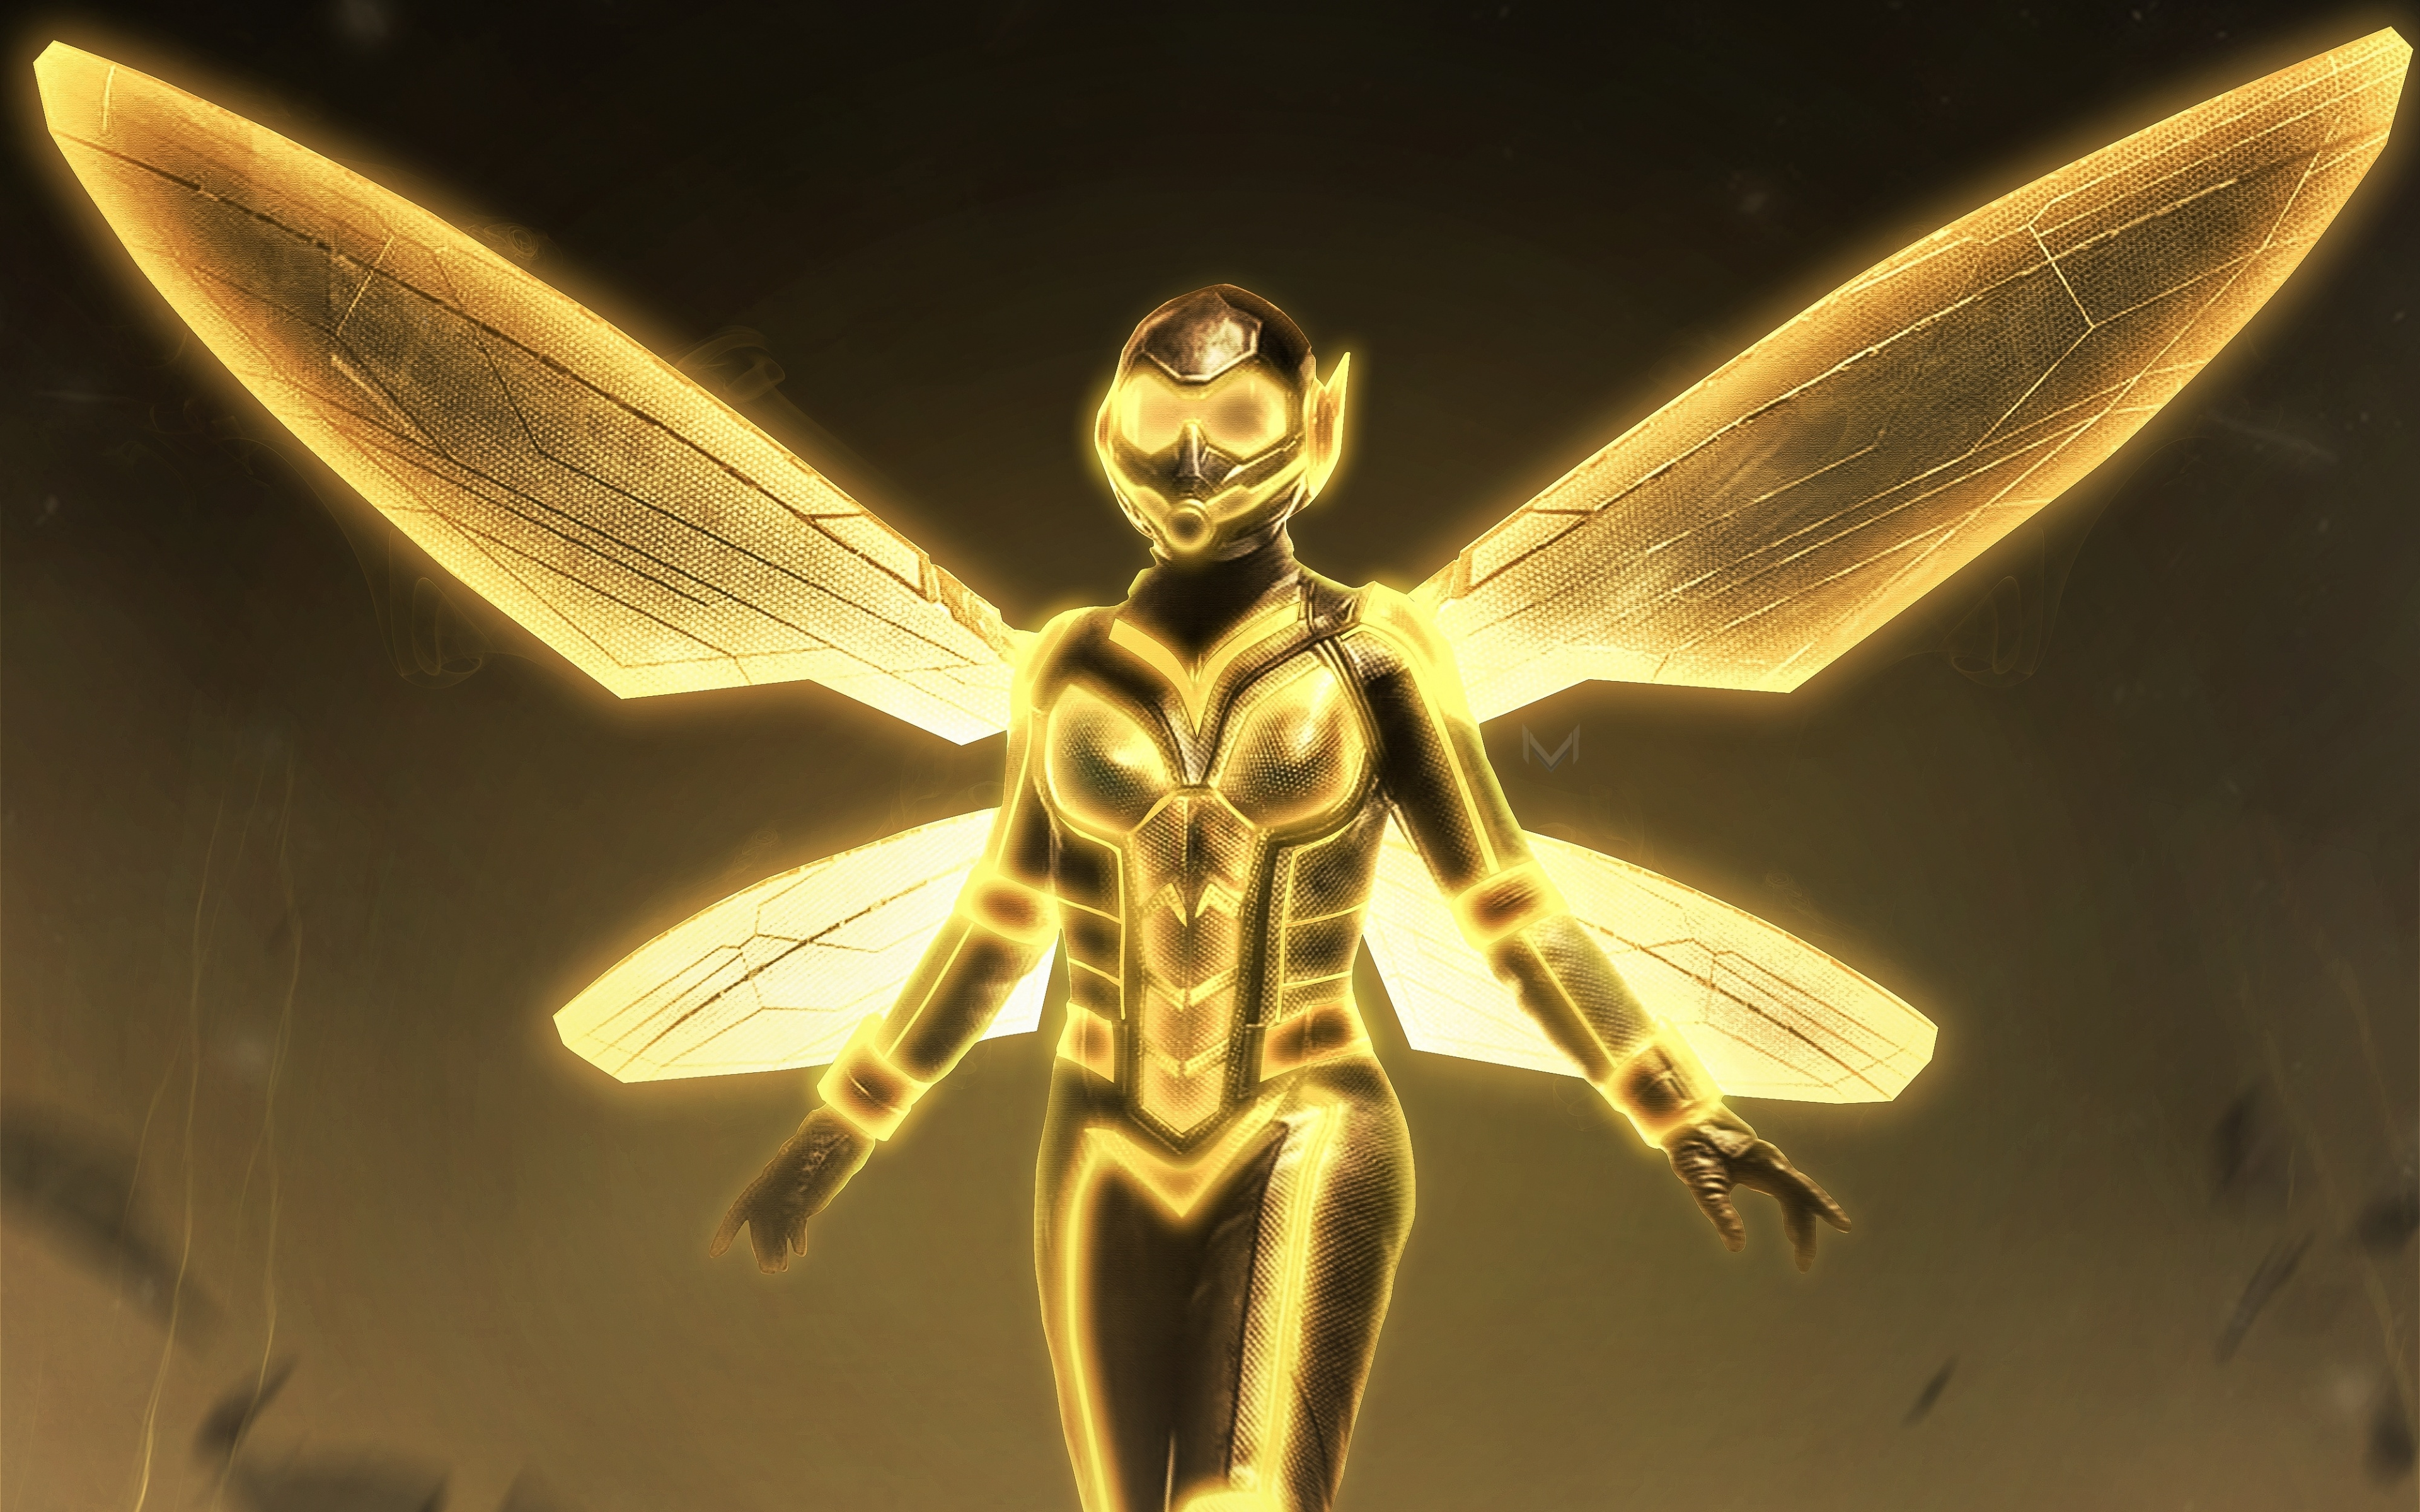 Download Wallpaper Wasp, 4k, 2018 Movie, Yellow Suit, Ant Man And The Wasp, Superheroes For Desktop With Resolution 3840x2400. High Quality HD Picture Wallpaper